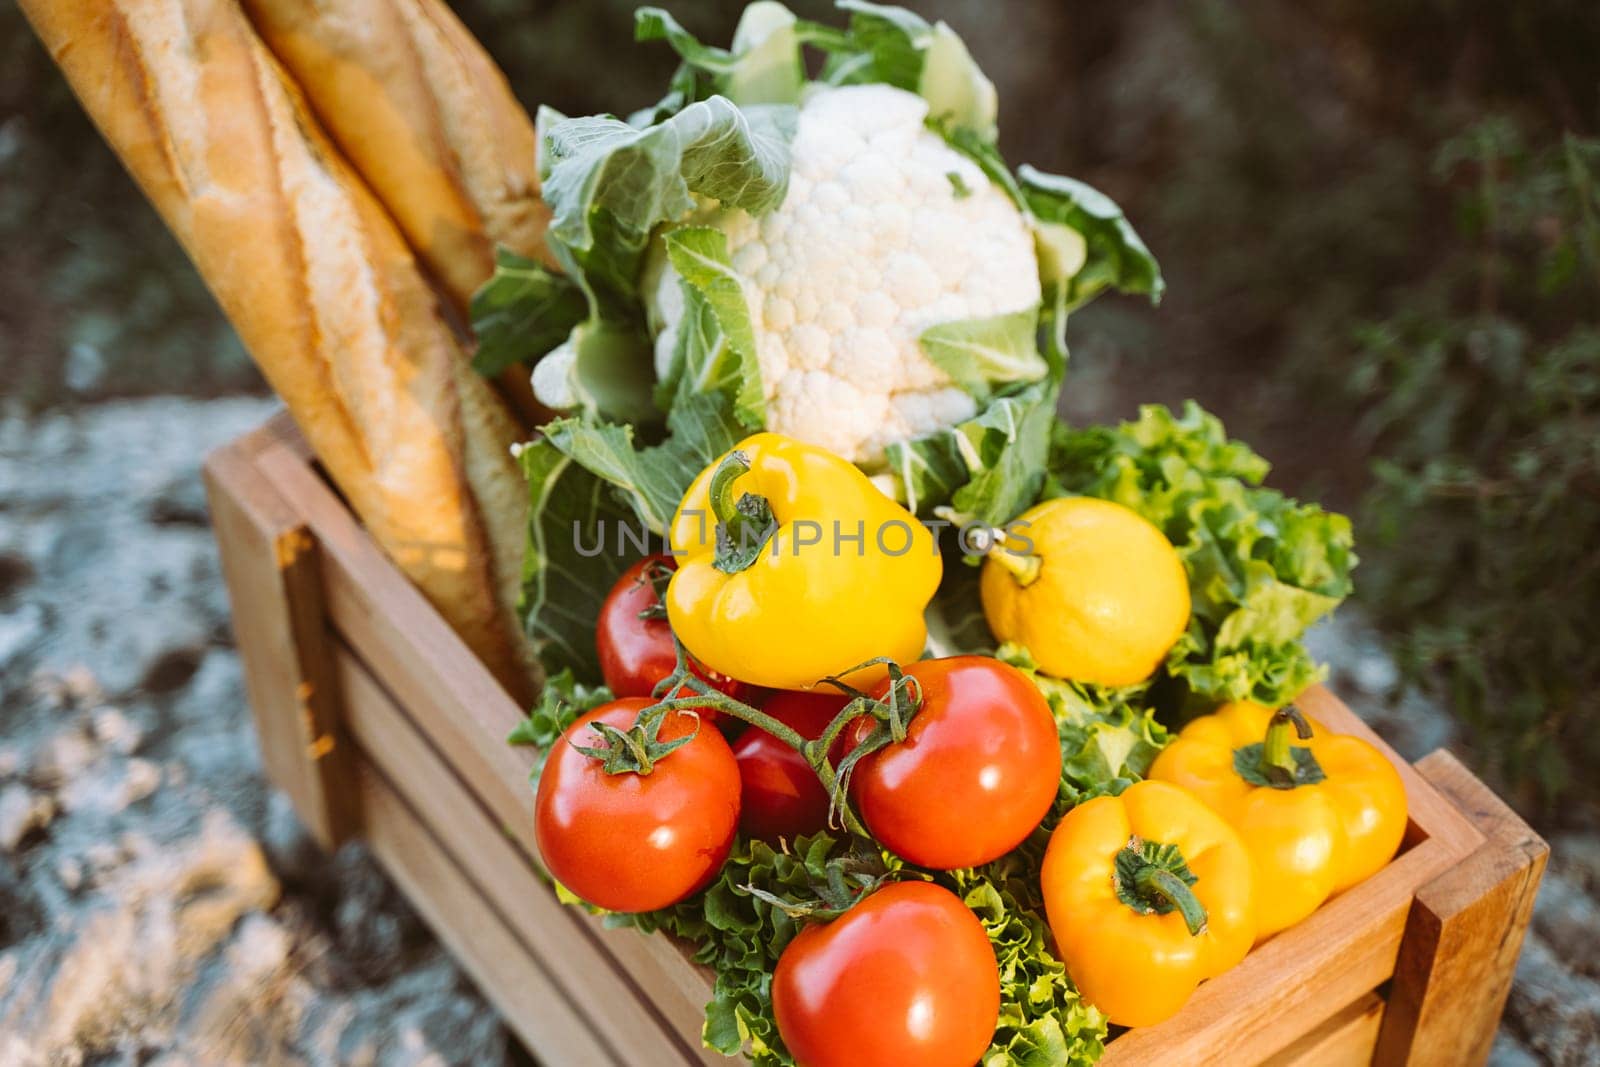 Wooden crate with farm market organic vegetables and baguettes standing on a stone. Closeup photo of frame crate with vegan food, tomatoes, bread, cauliflower, and sweet pepper